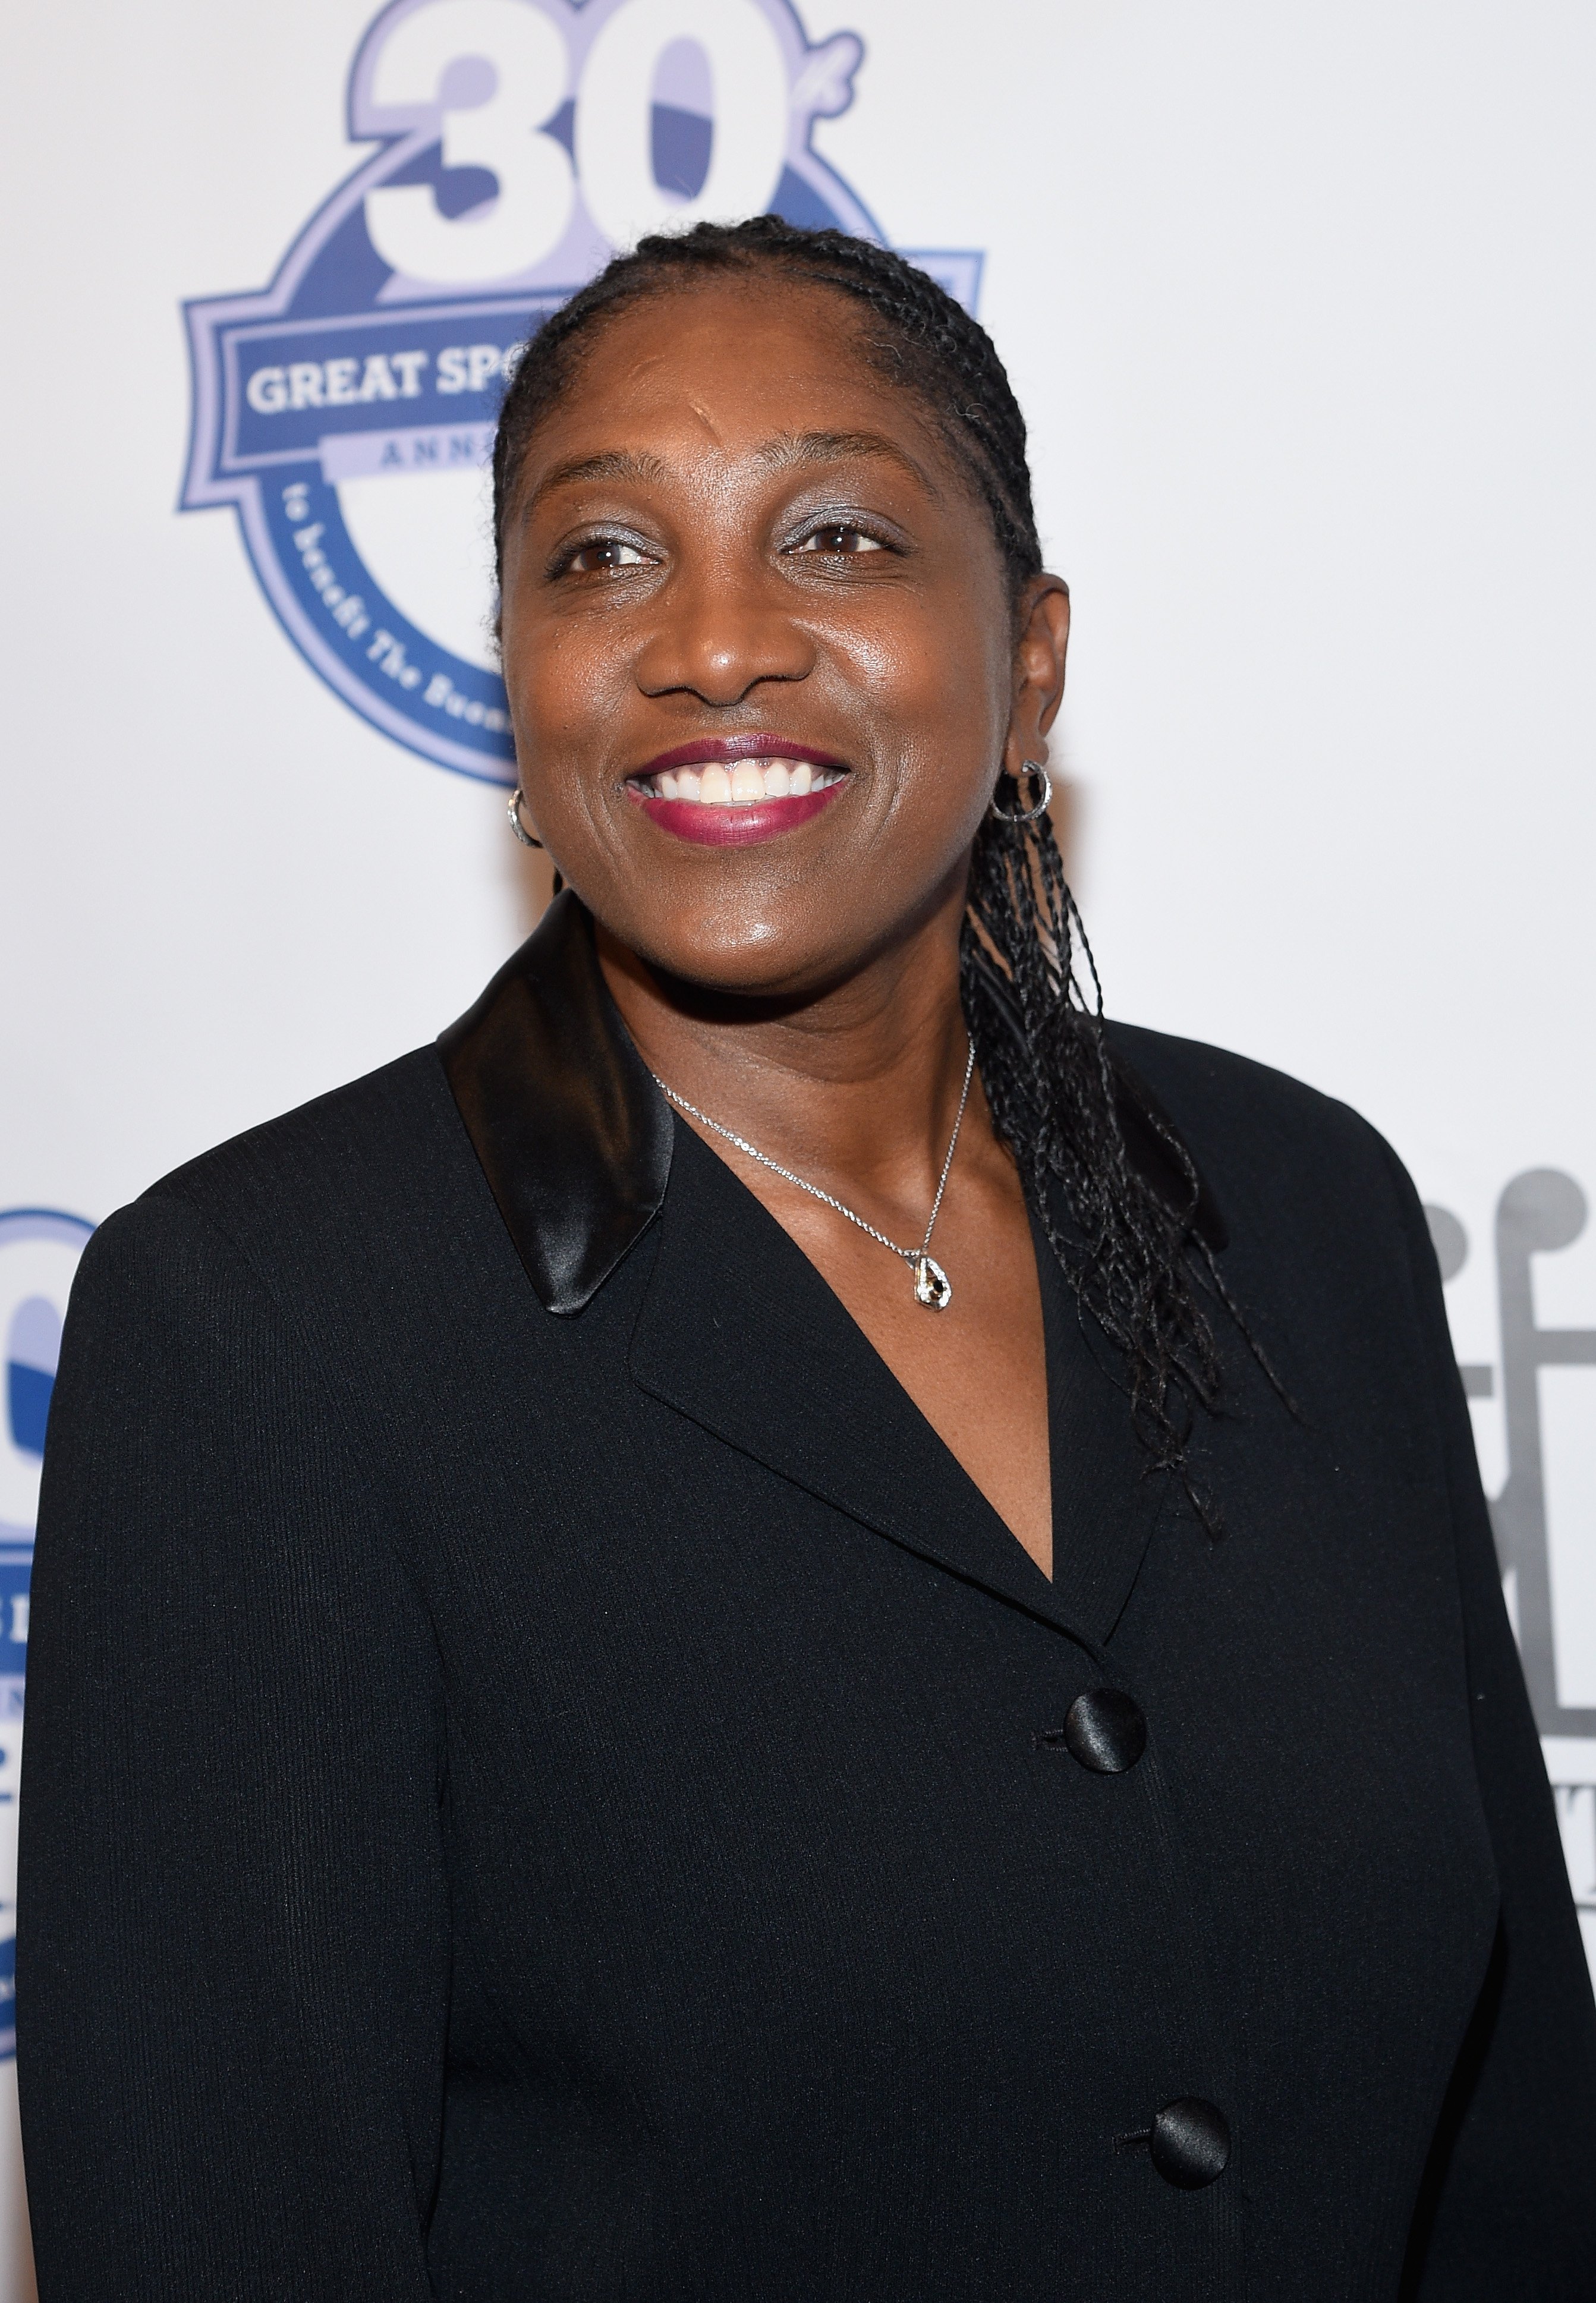 Former WNBA player Teresa Edwards at the 30th Annual Great Sports Legends Dinner to benefit The Buoniconti Fund to Cure Paralysis on October 6, 2015 | Photo: Getty Images